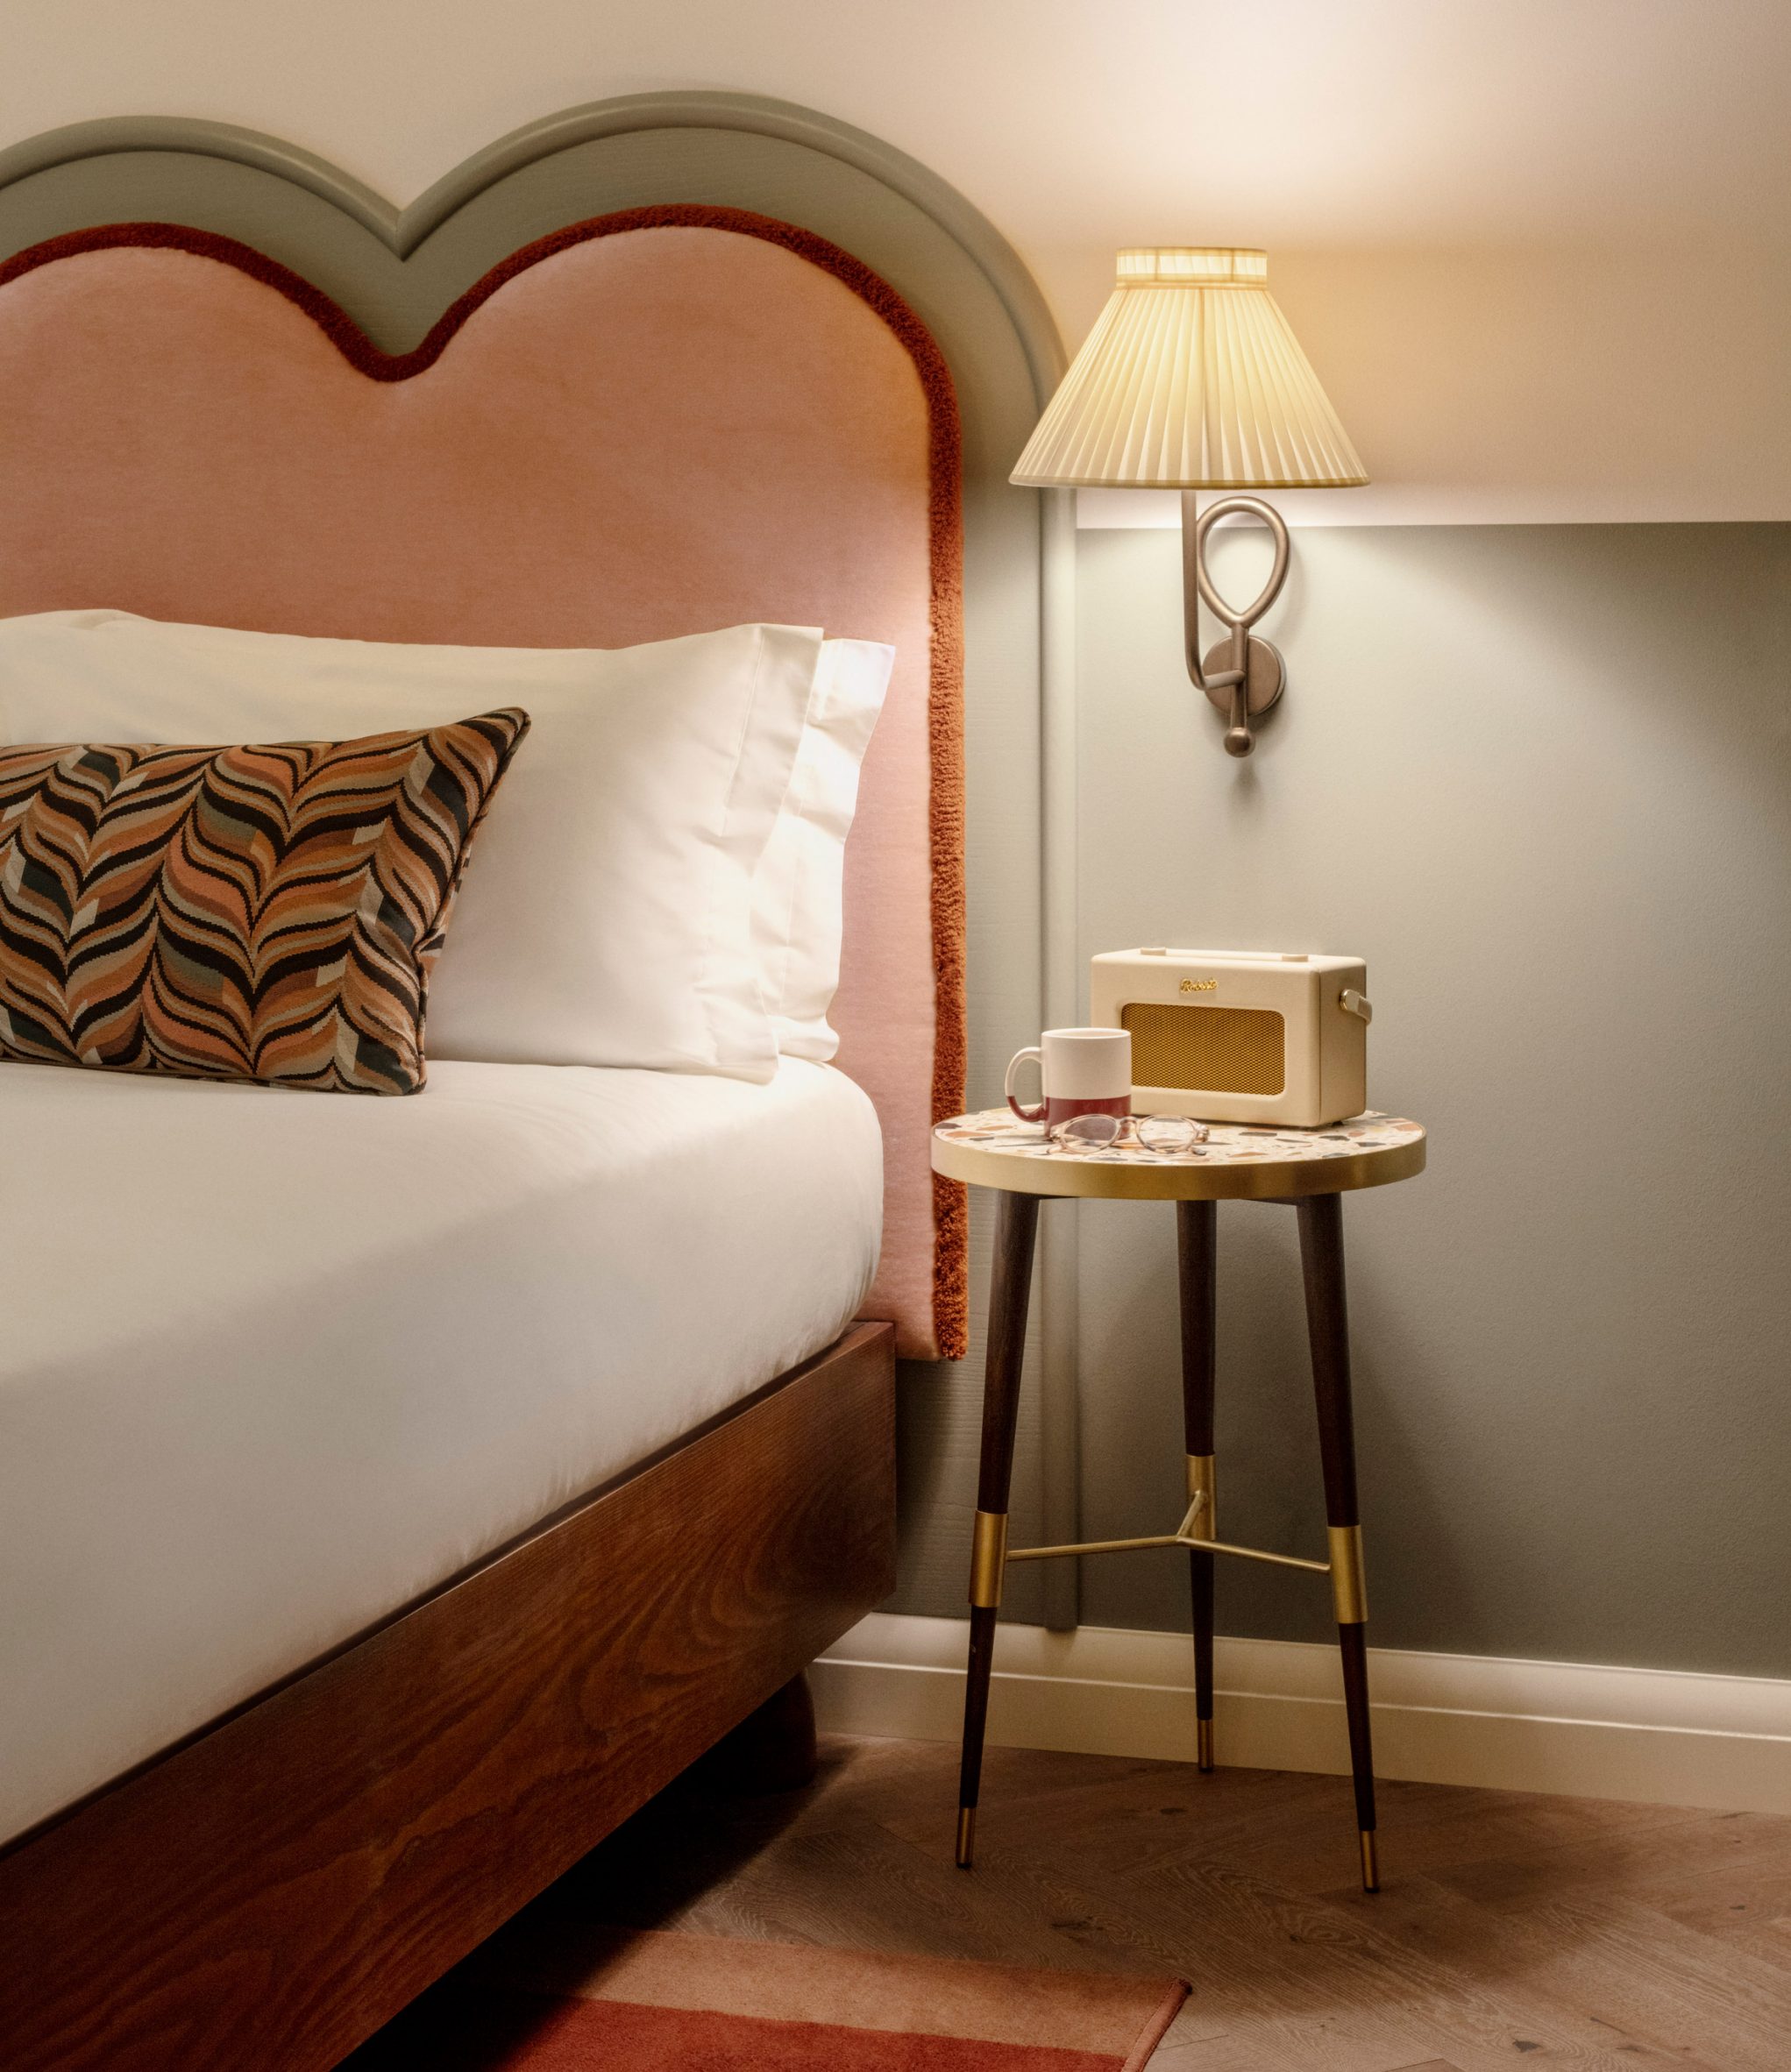 Close-up of hotel bed and nightstand